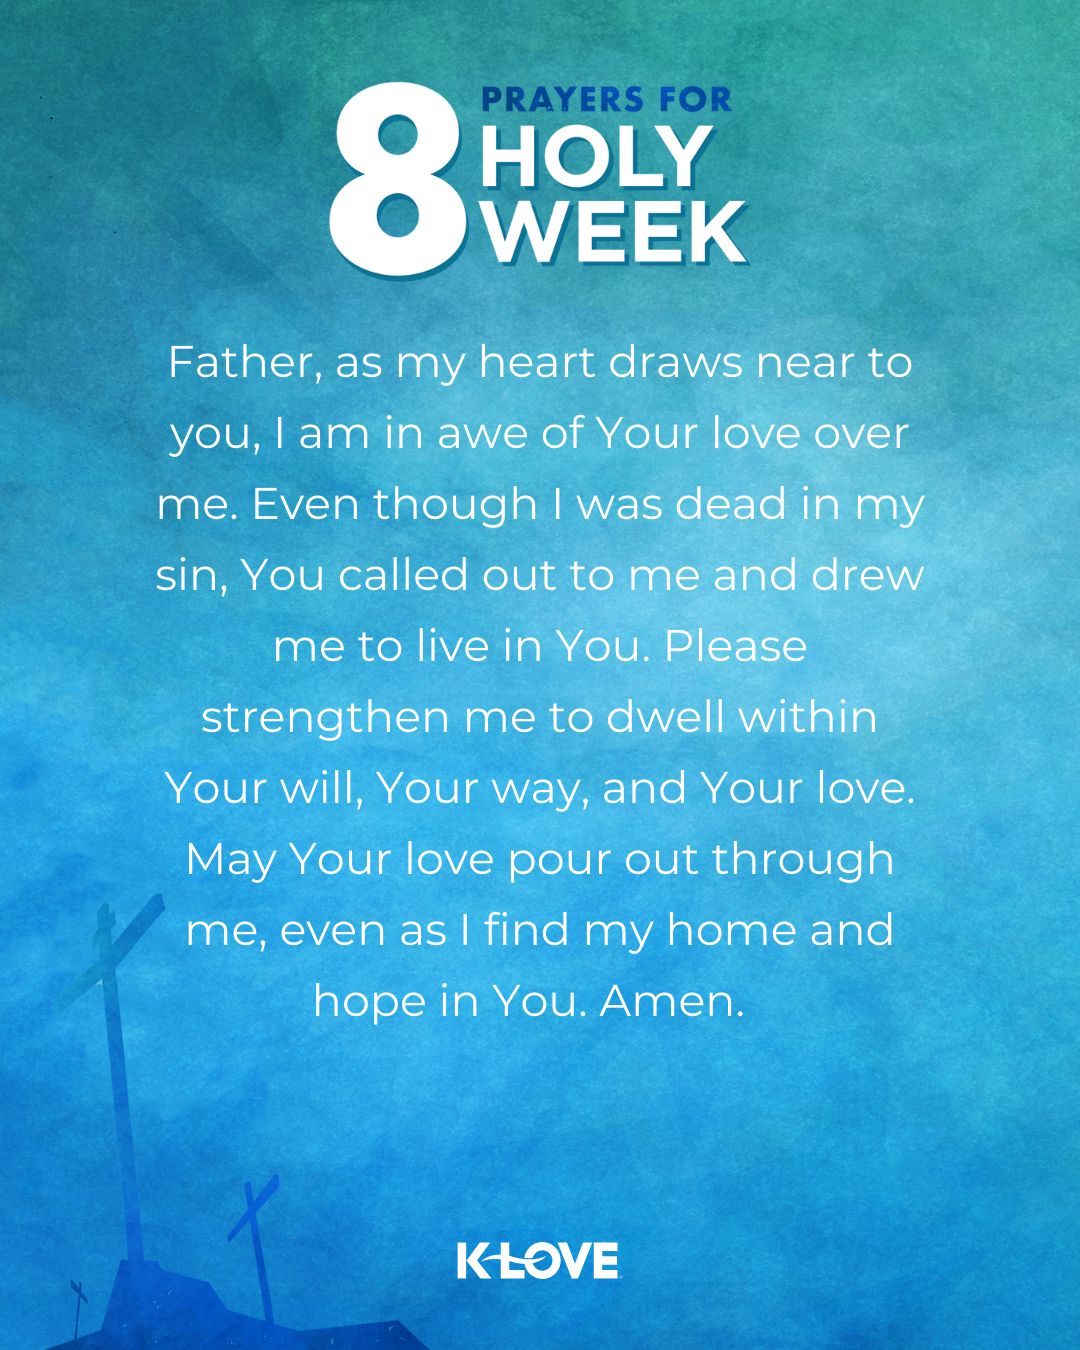  Father, as my heart draws near to you, I am in awe of Your love over me. Even though I was dead in my sin, You called out to me and drew me to live in You. Please strengthen me to dwell within Your will, Your way, and Your love. May Your love pour out through me, even as I find my home and hope in You. Amen.